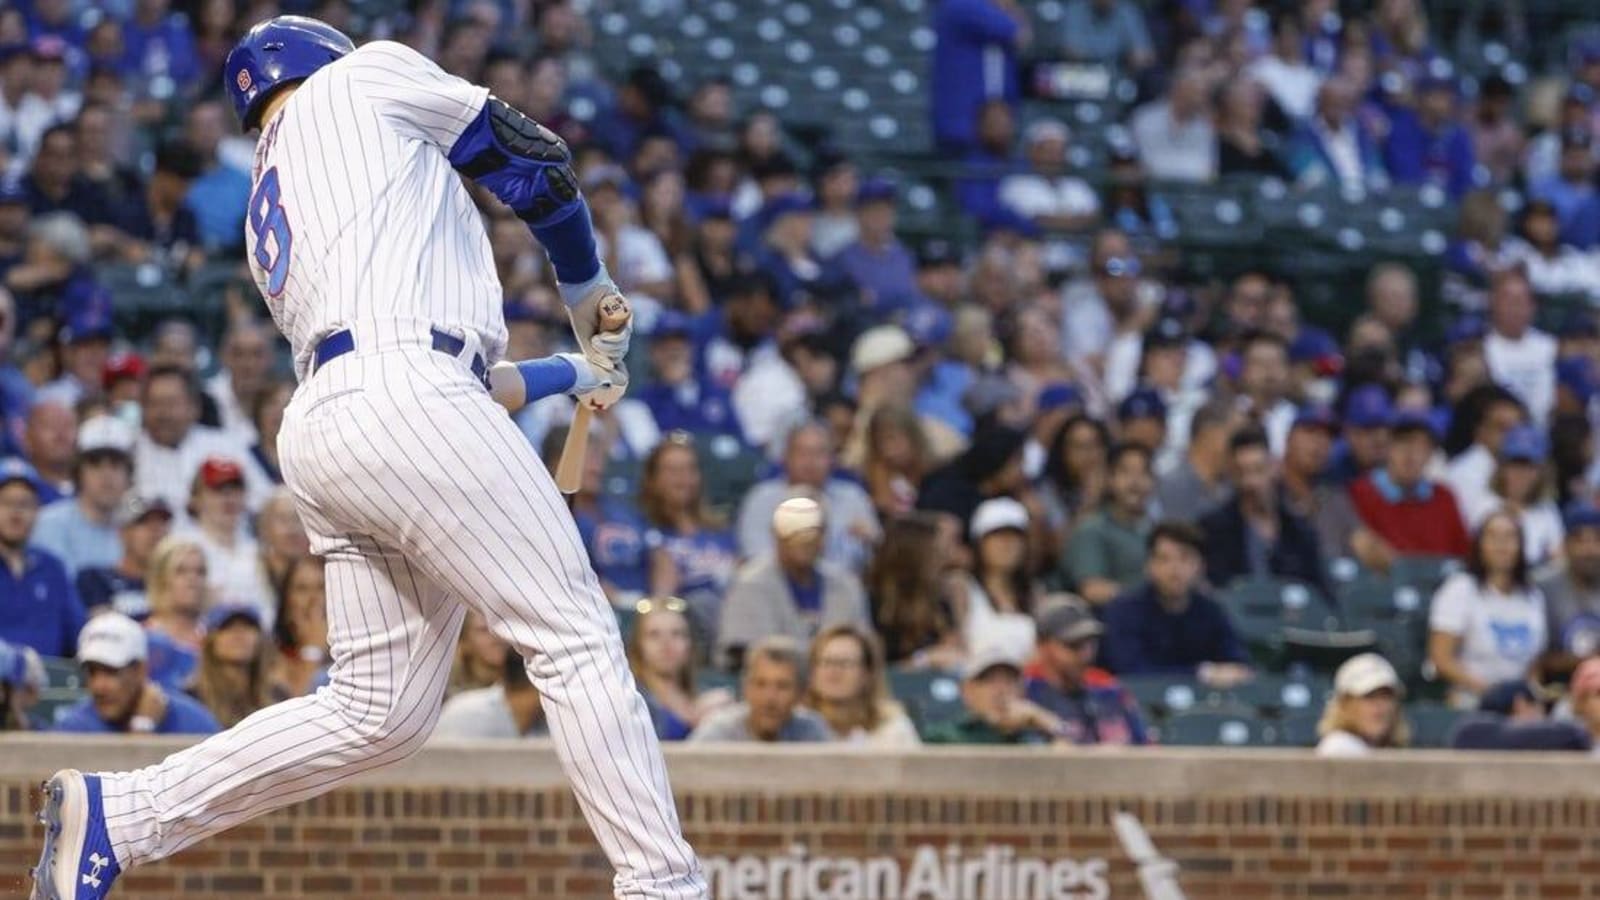 Cubs end three-game skid with easy win over Reds